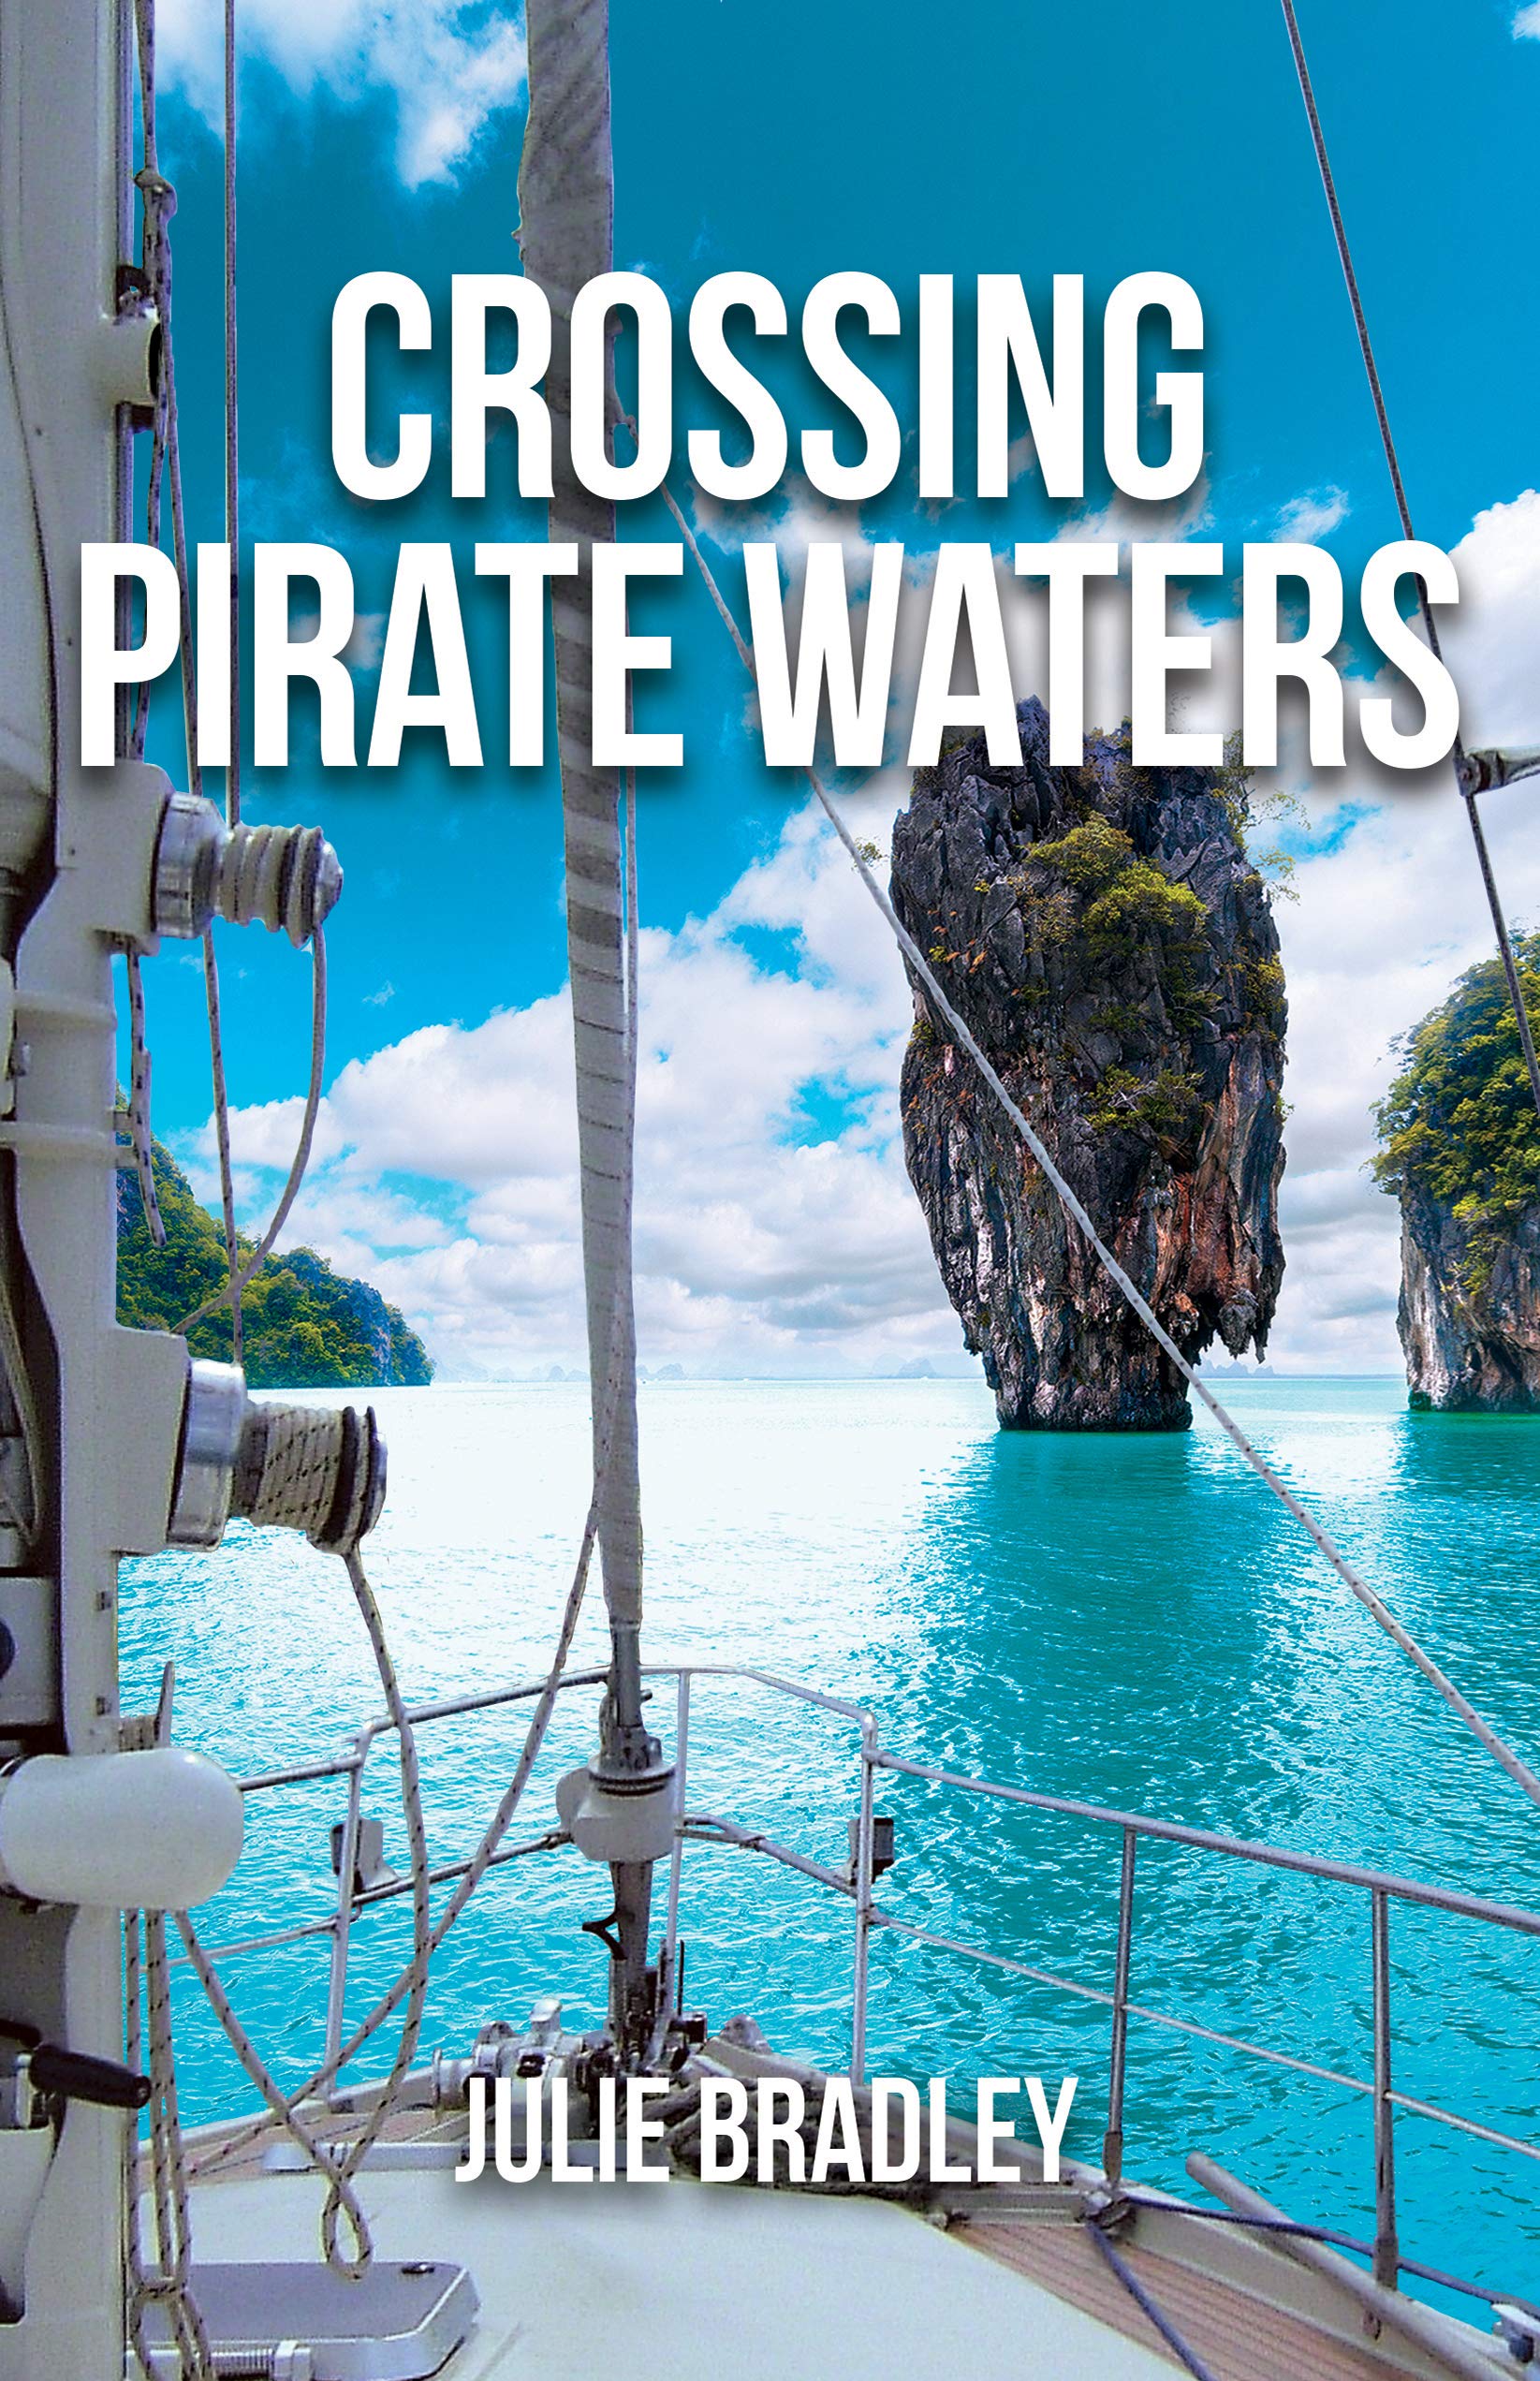 Crossing Pirate Waters (Escape Series Book 2)